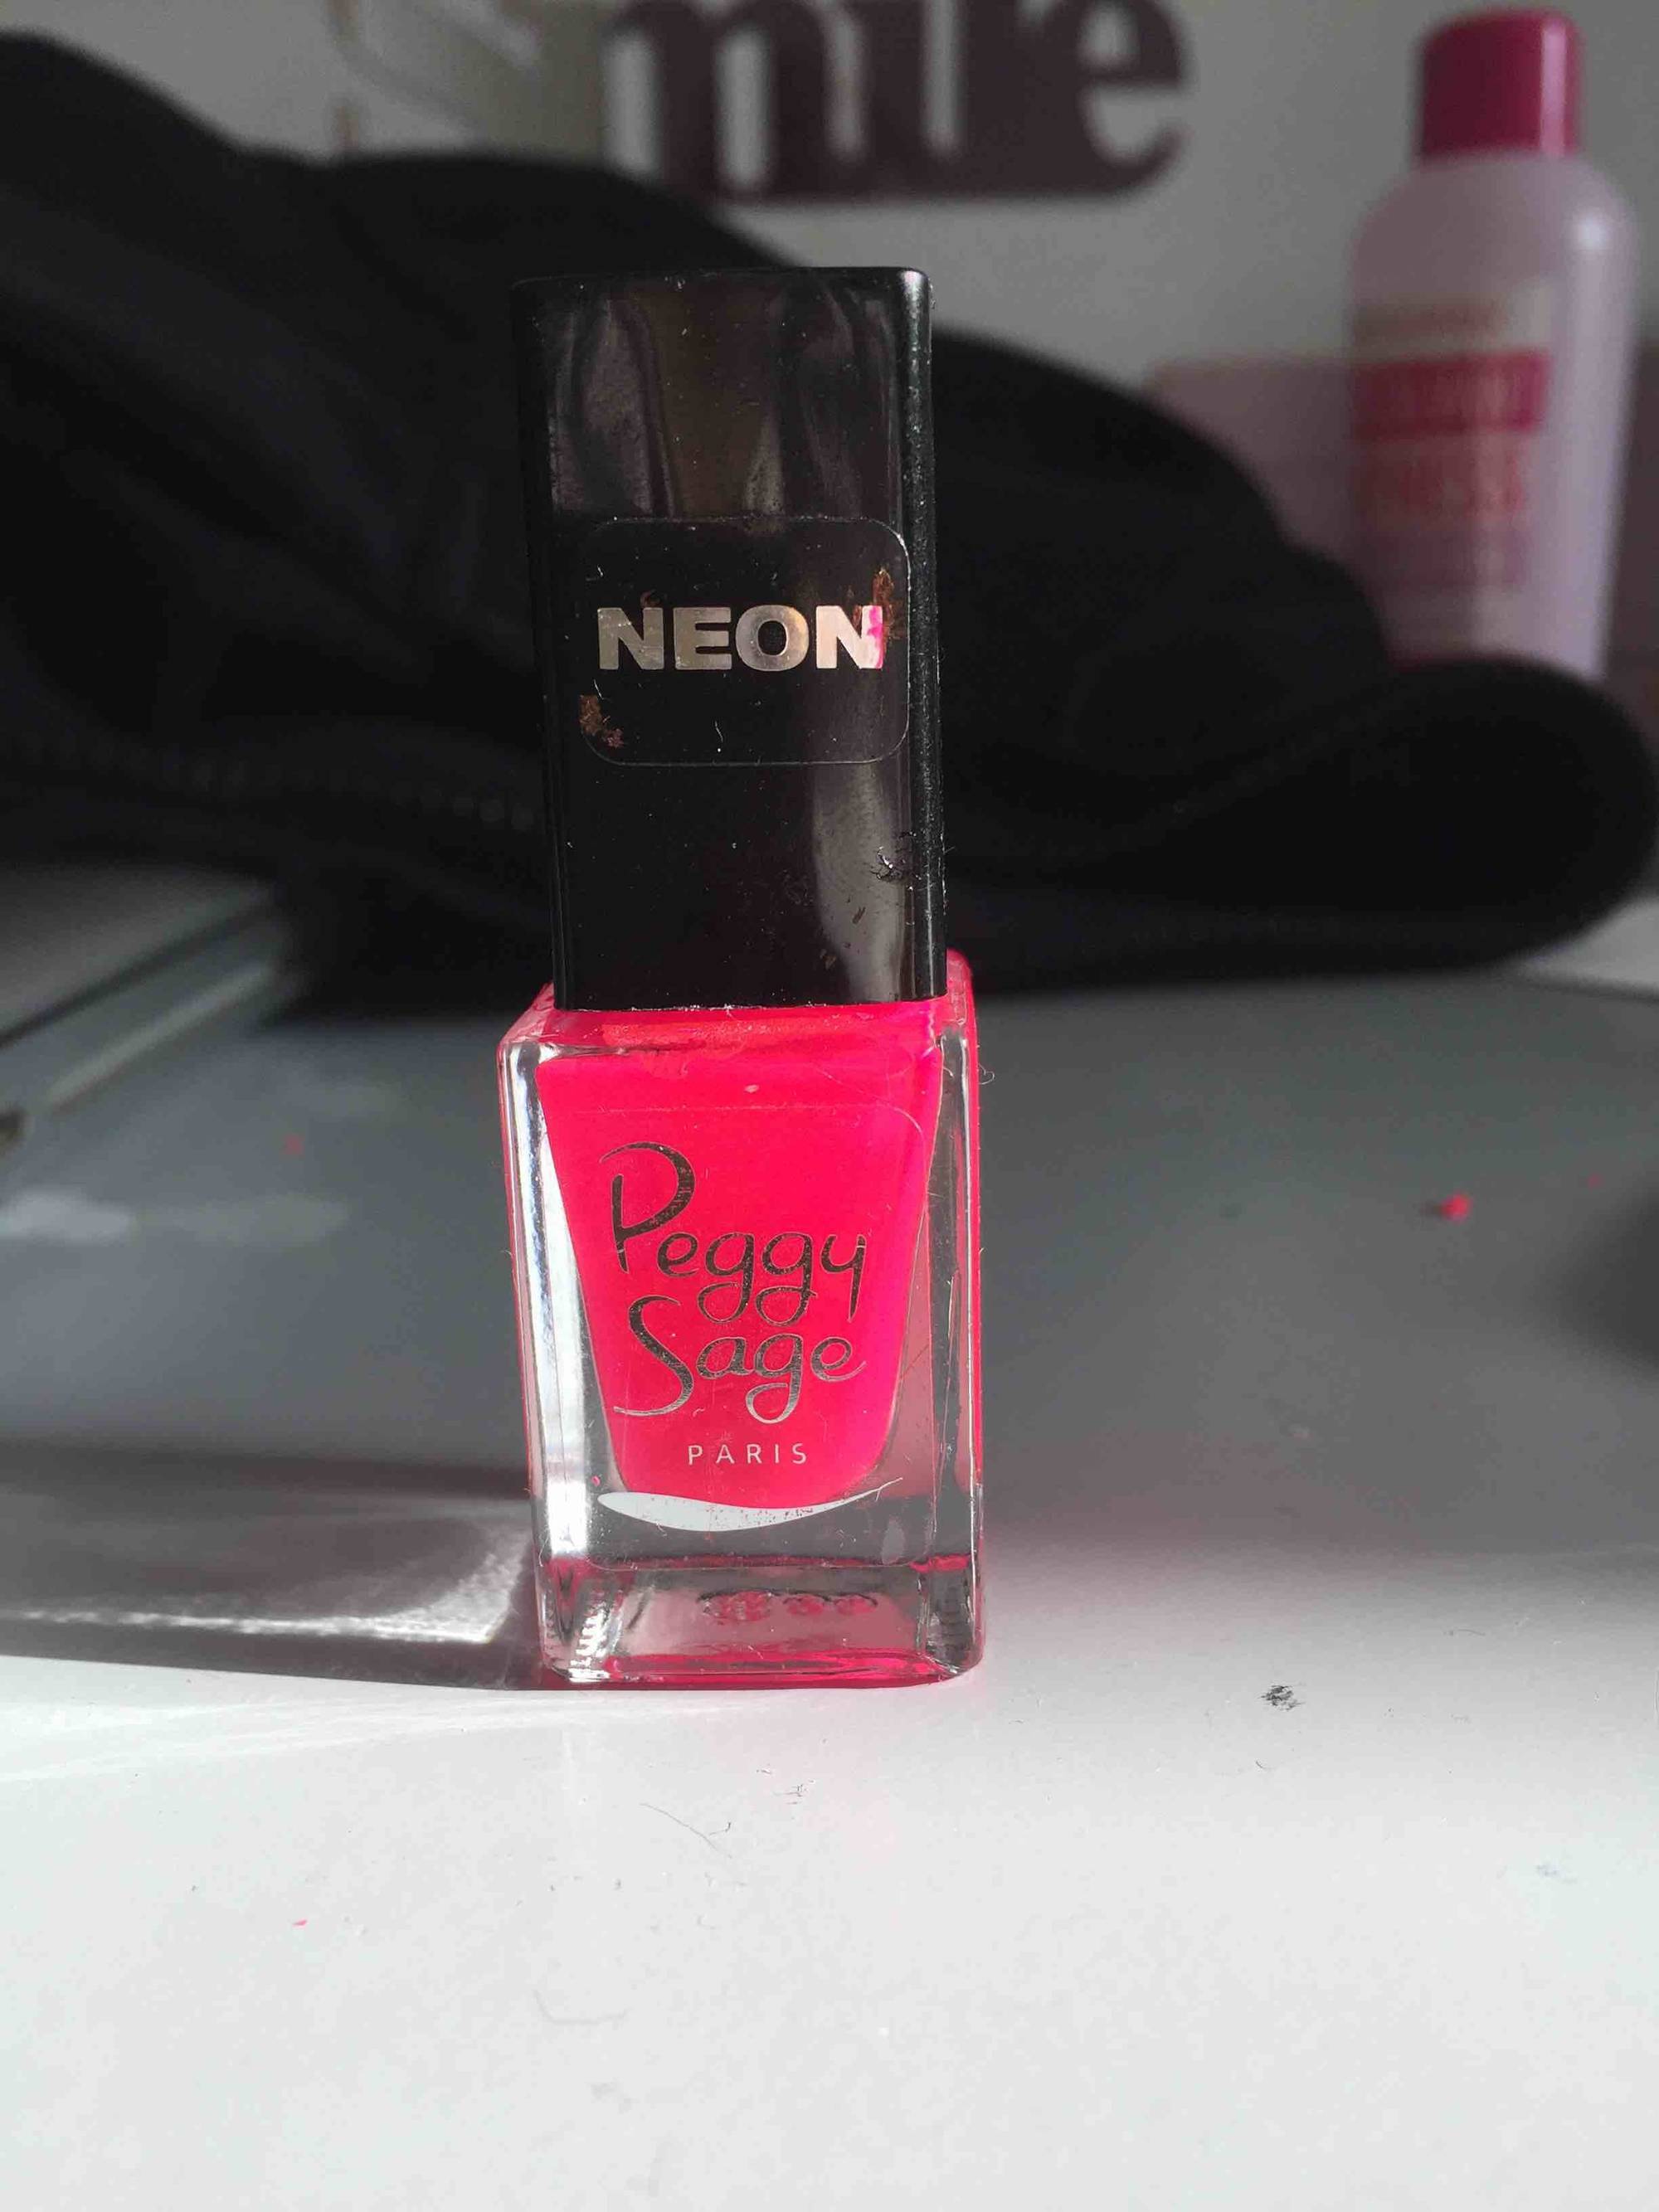 PEGGY SAGE - Neon - Vernis à ongles lola 5802